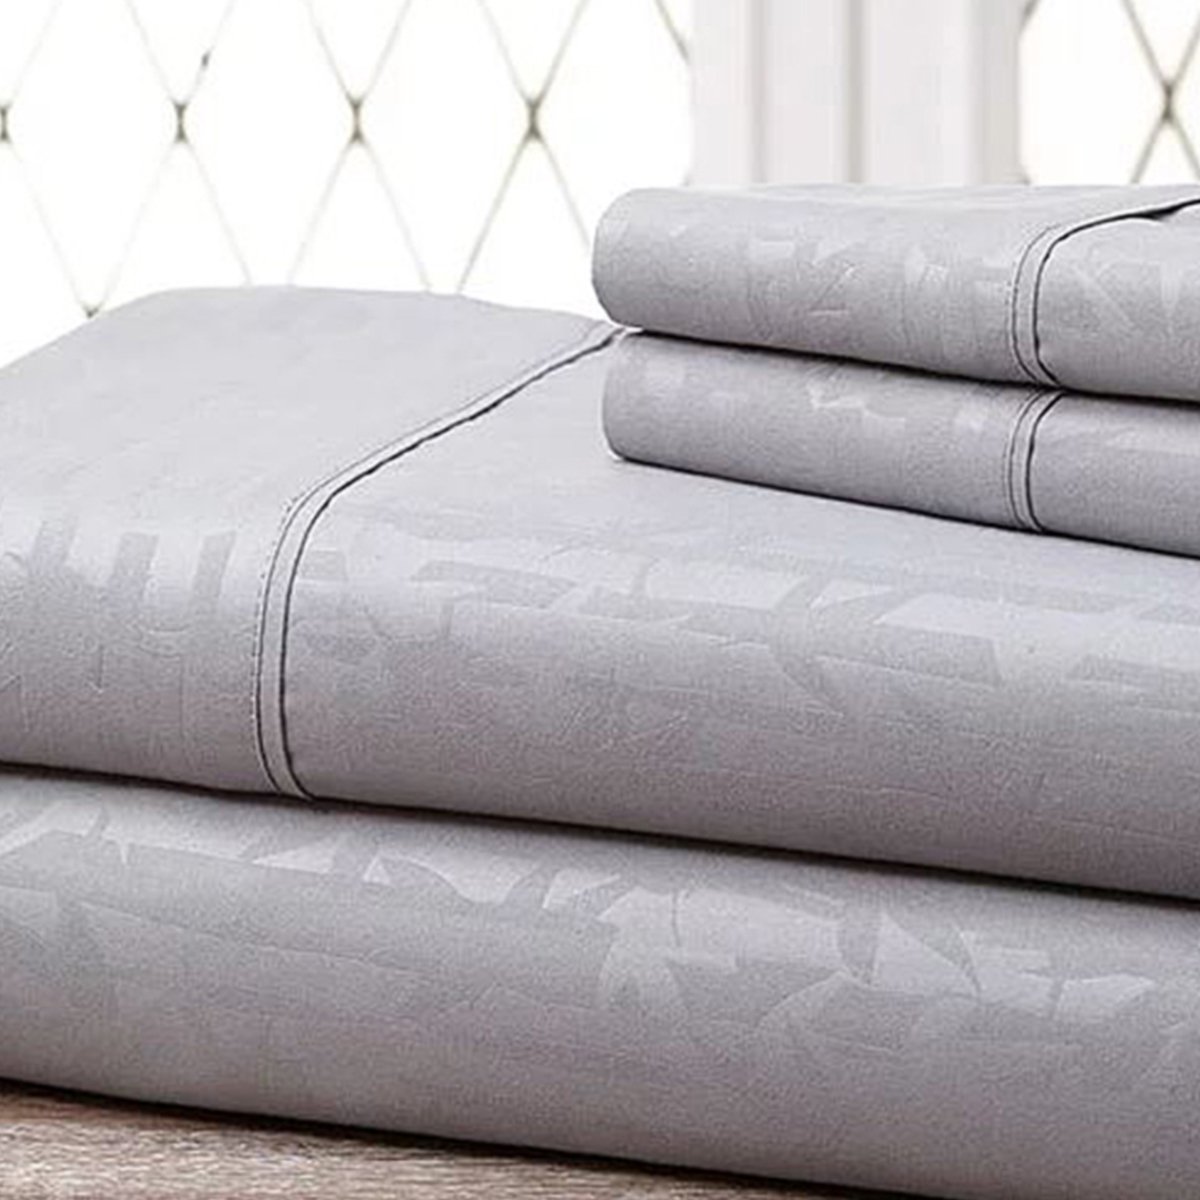 Hny-4pc-eb-gra-k Super-soft 1600 Series Bamboo Embossed Bed Sheet, Gray - King, 4 Piece